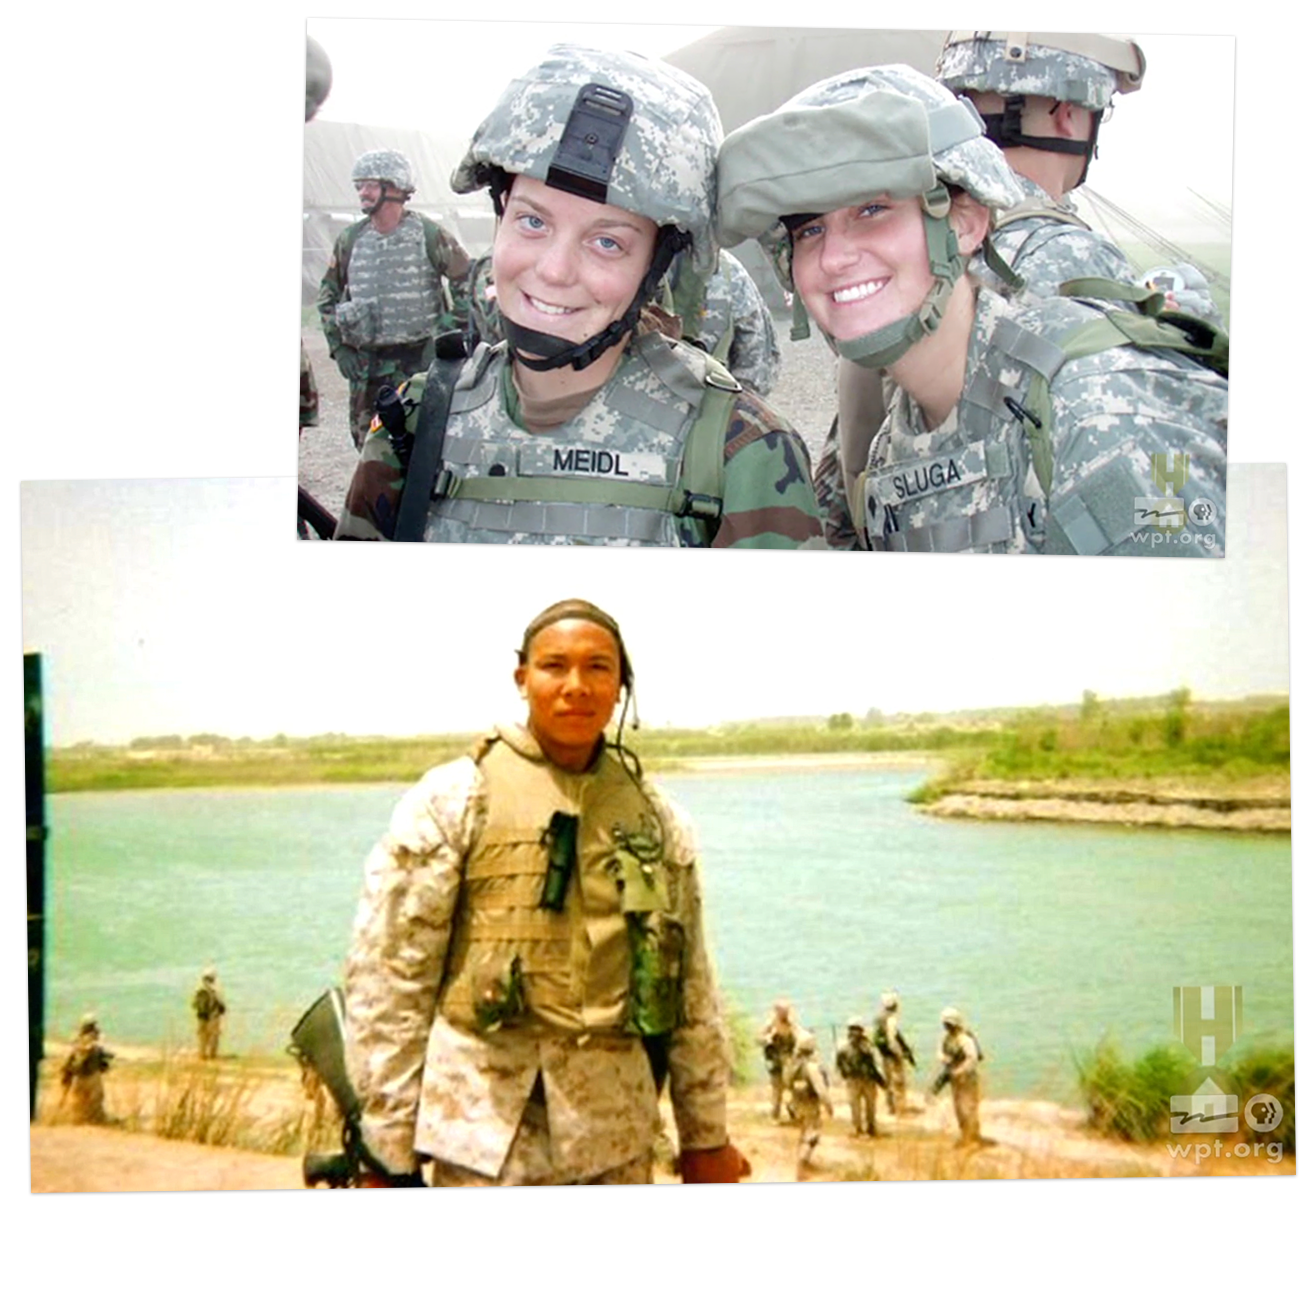 Two photographs of Americans serving in the military.